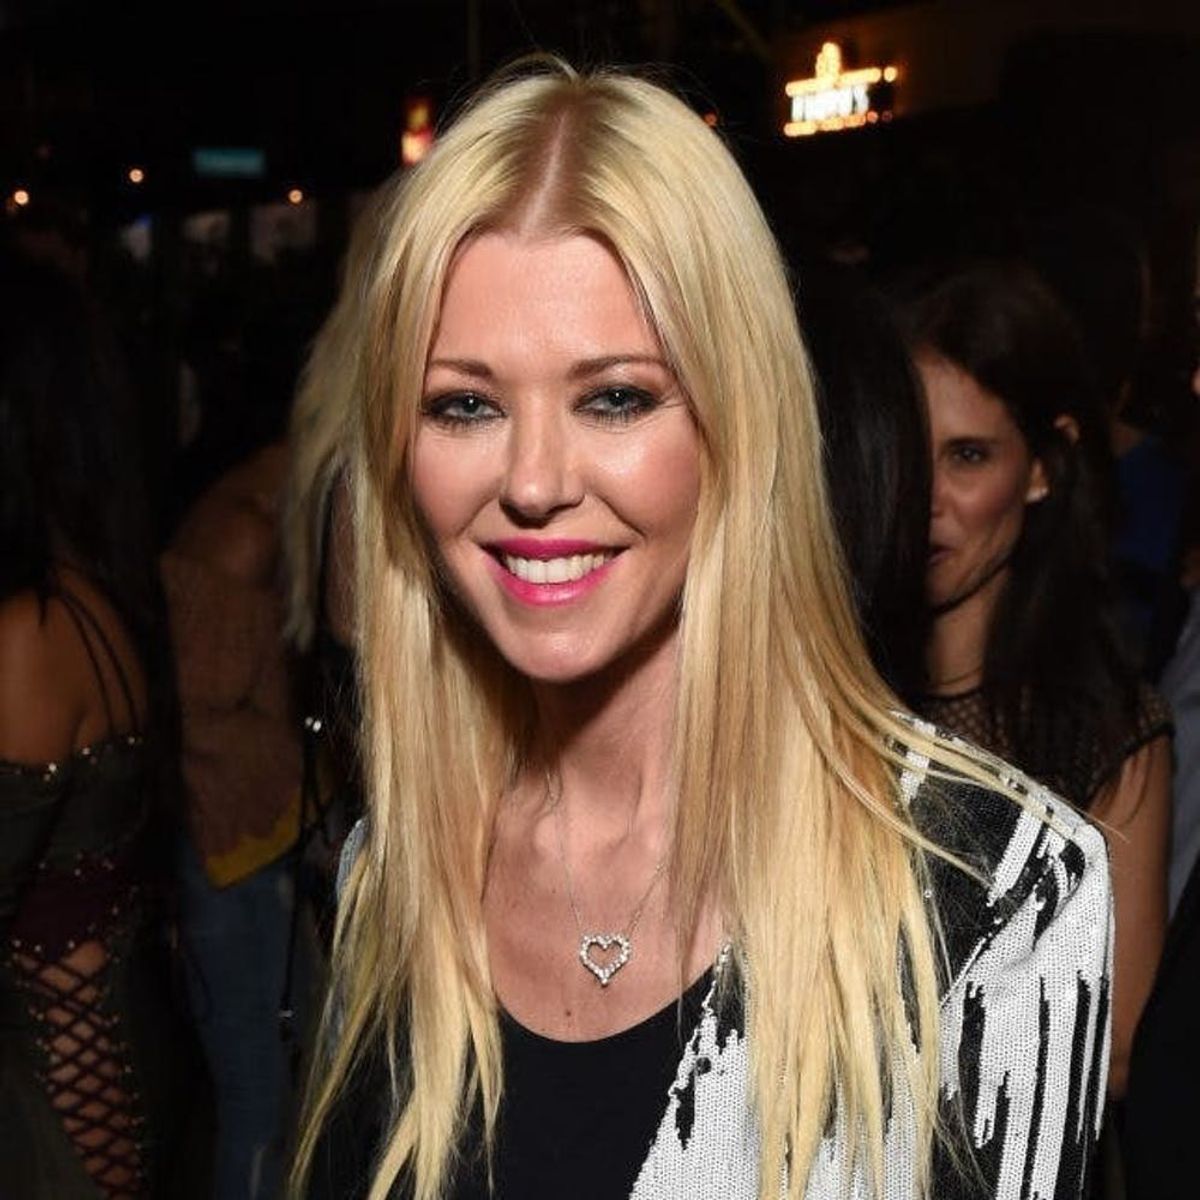 Tara Reid Is Pretty Much Unrecognizable With Her New Platinum ‘Do and Bangs